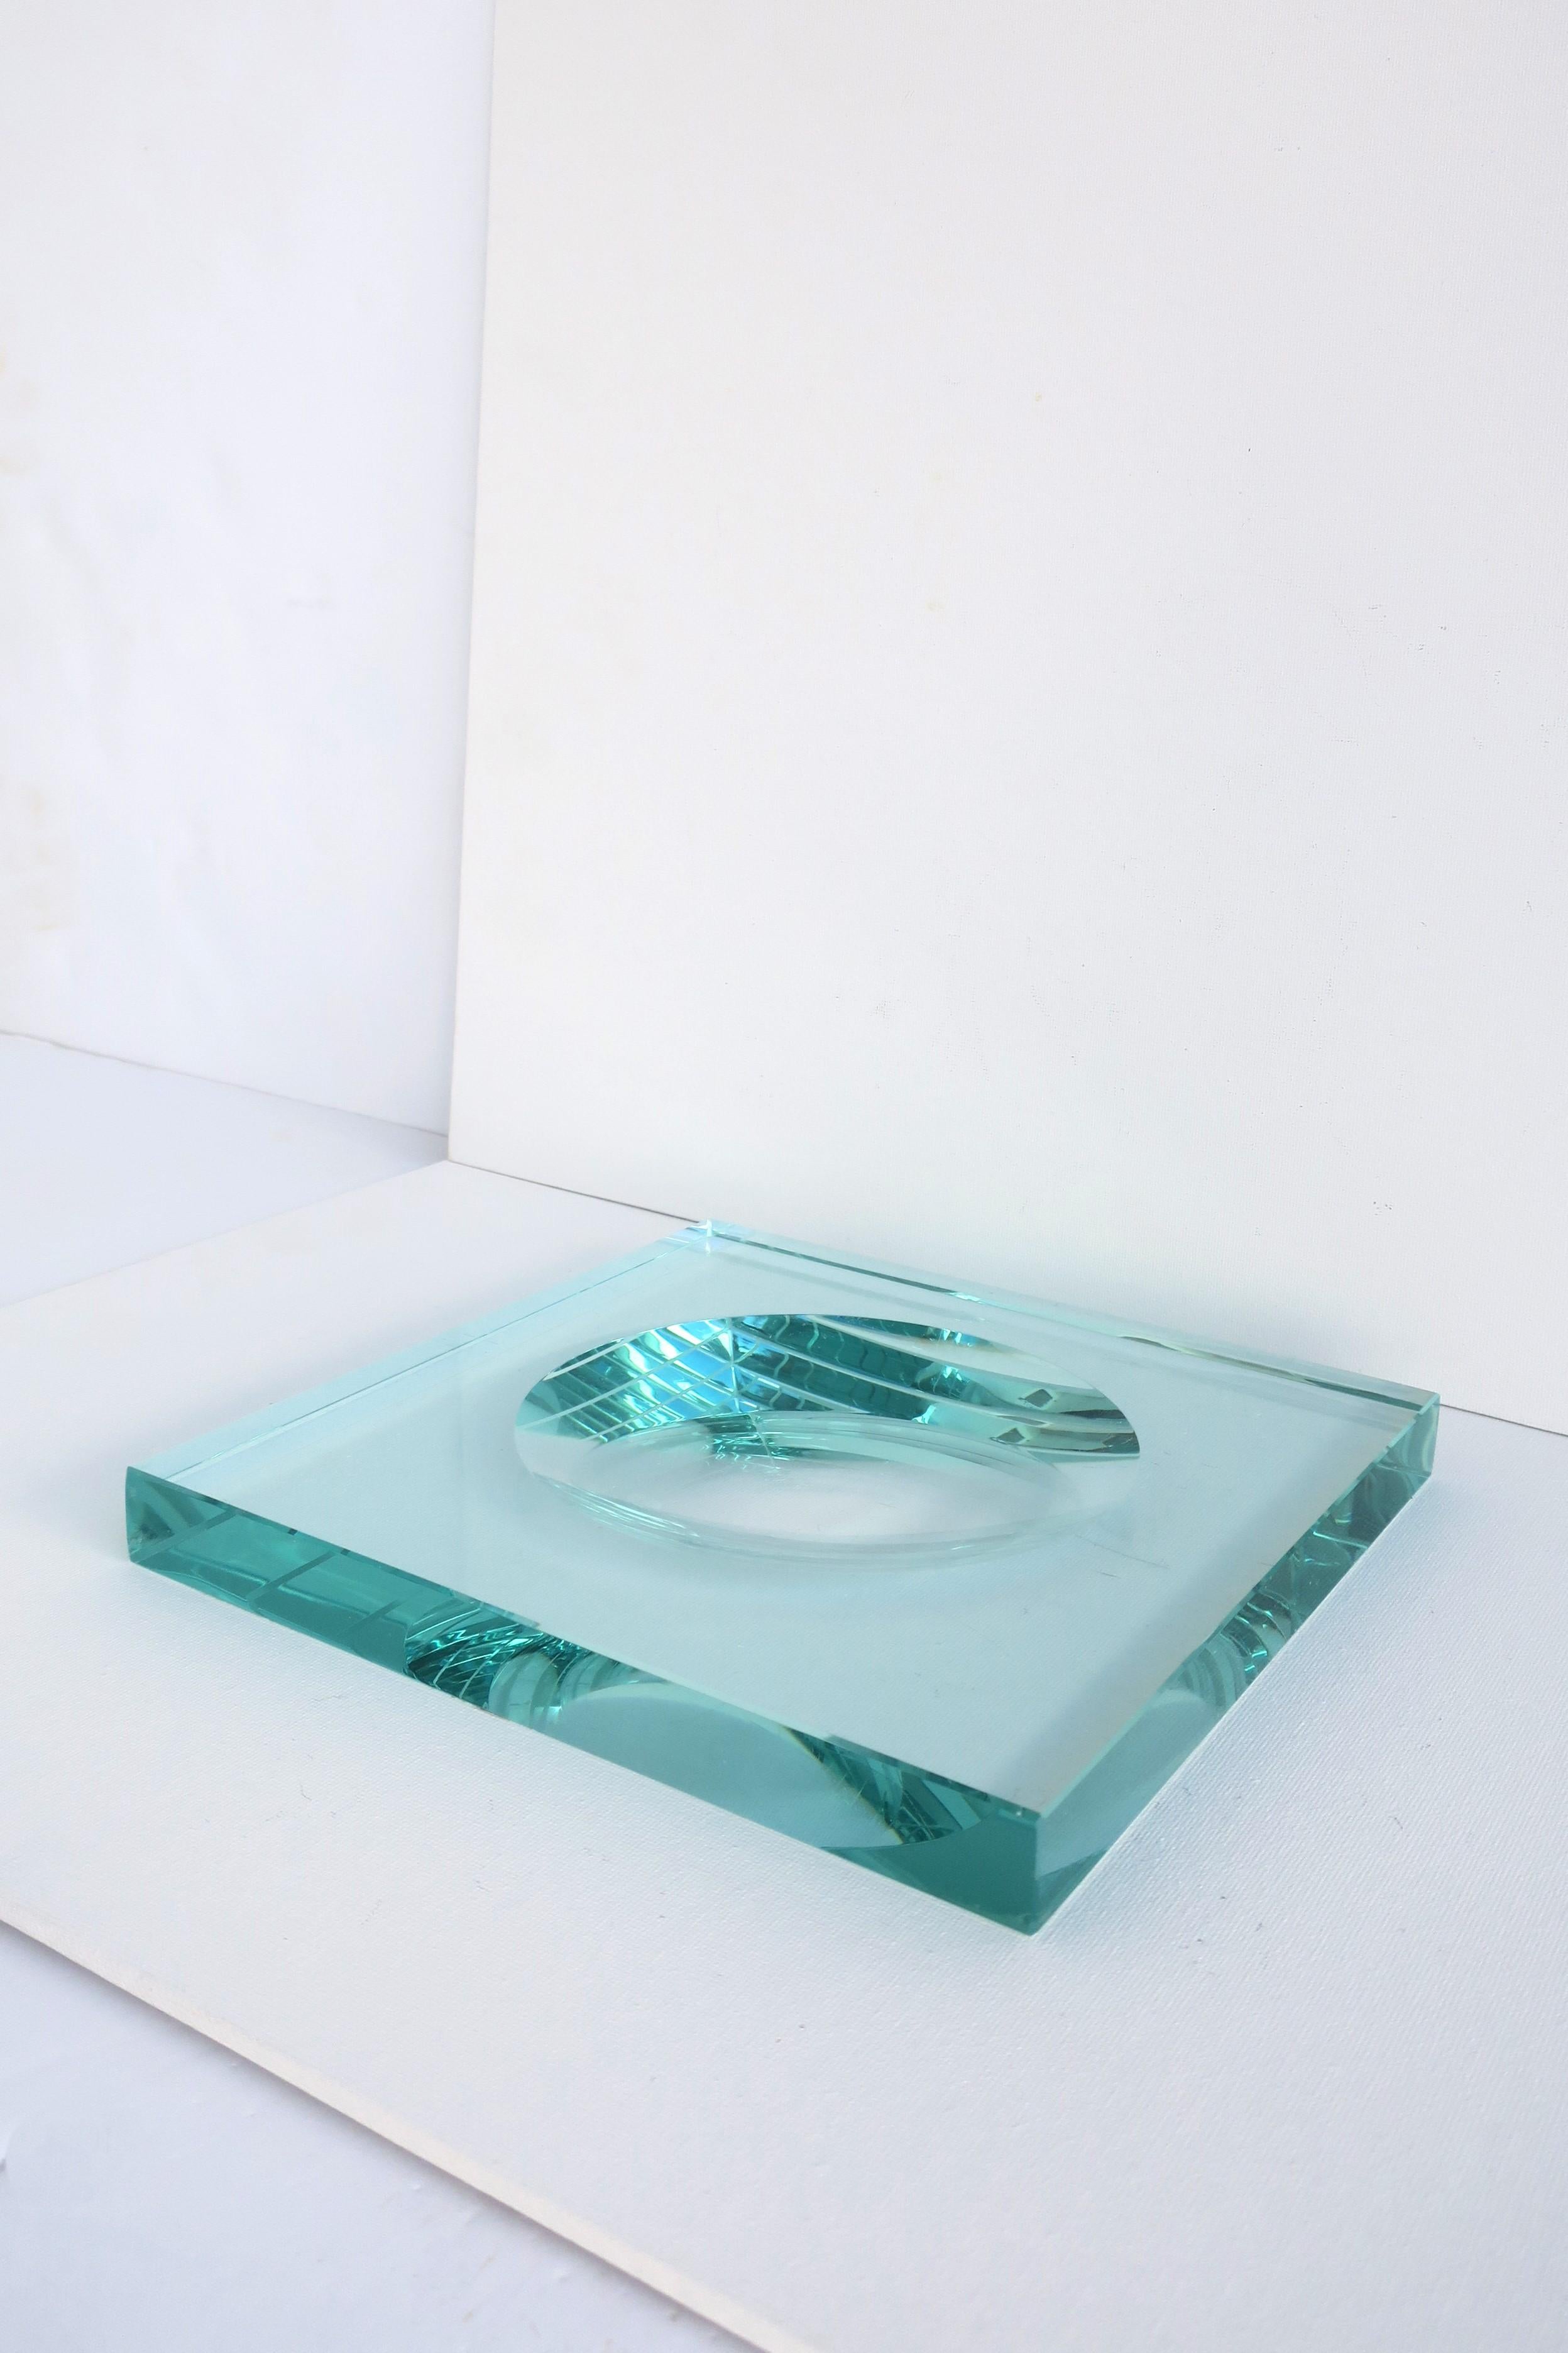 **Two available, each sold separately, as per listing. 

A beautiful all-glass transparent catchall vide-poche in the Minimalist or Post-Modern design style, in the style of Italian design Maison, Fontana Arte, circa late-20th century. Piece is